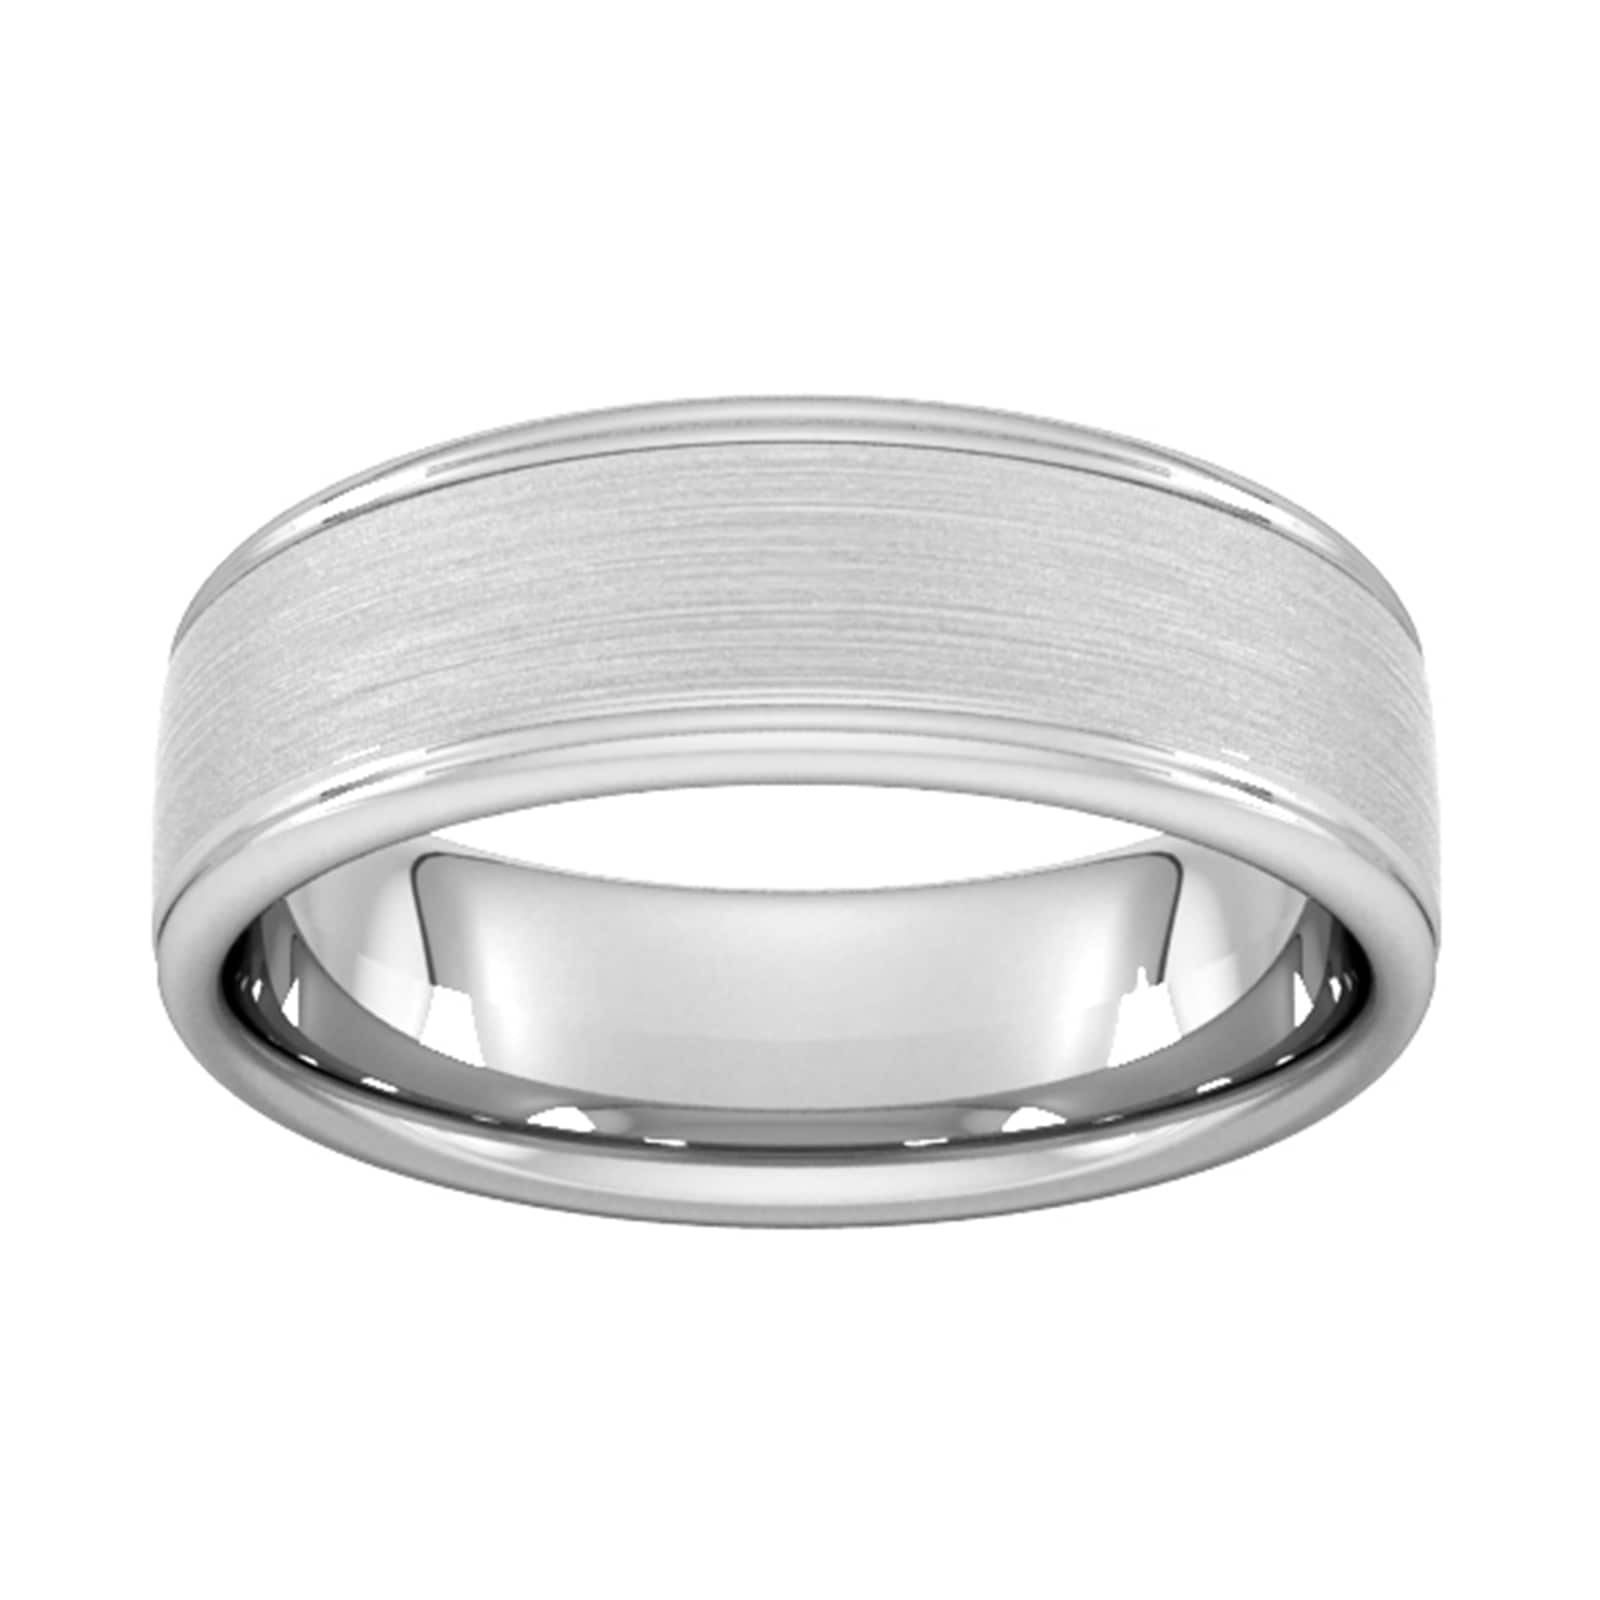 7mm D Shape Heavy Matt Centre With Grooves Wedding Ring In 9 Carat White Gold - Ring Size G